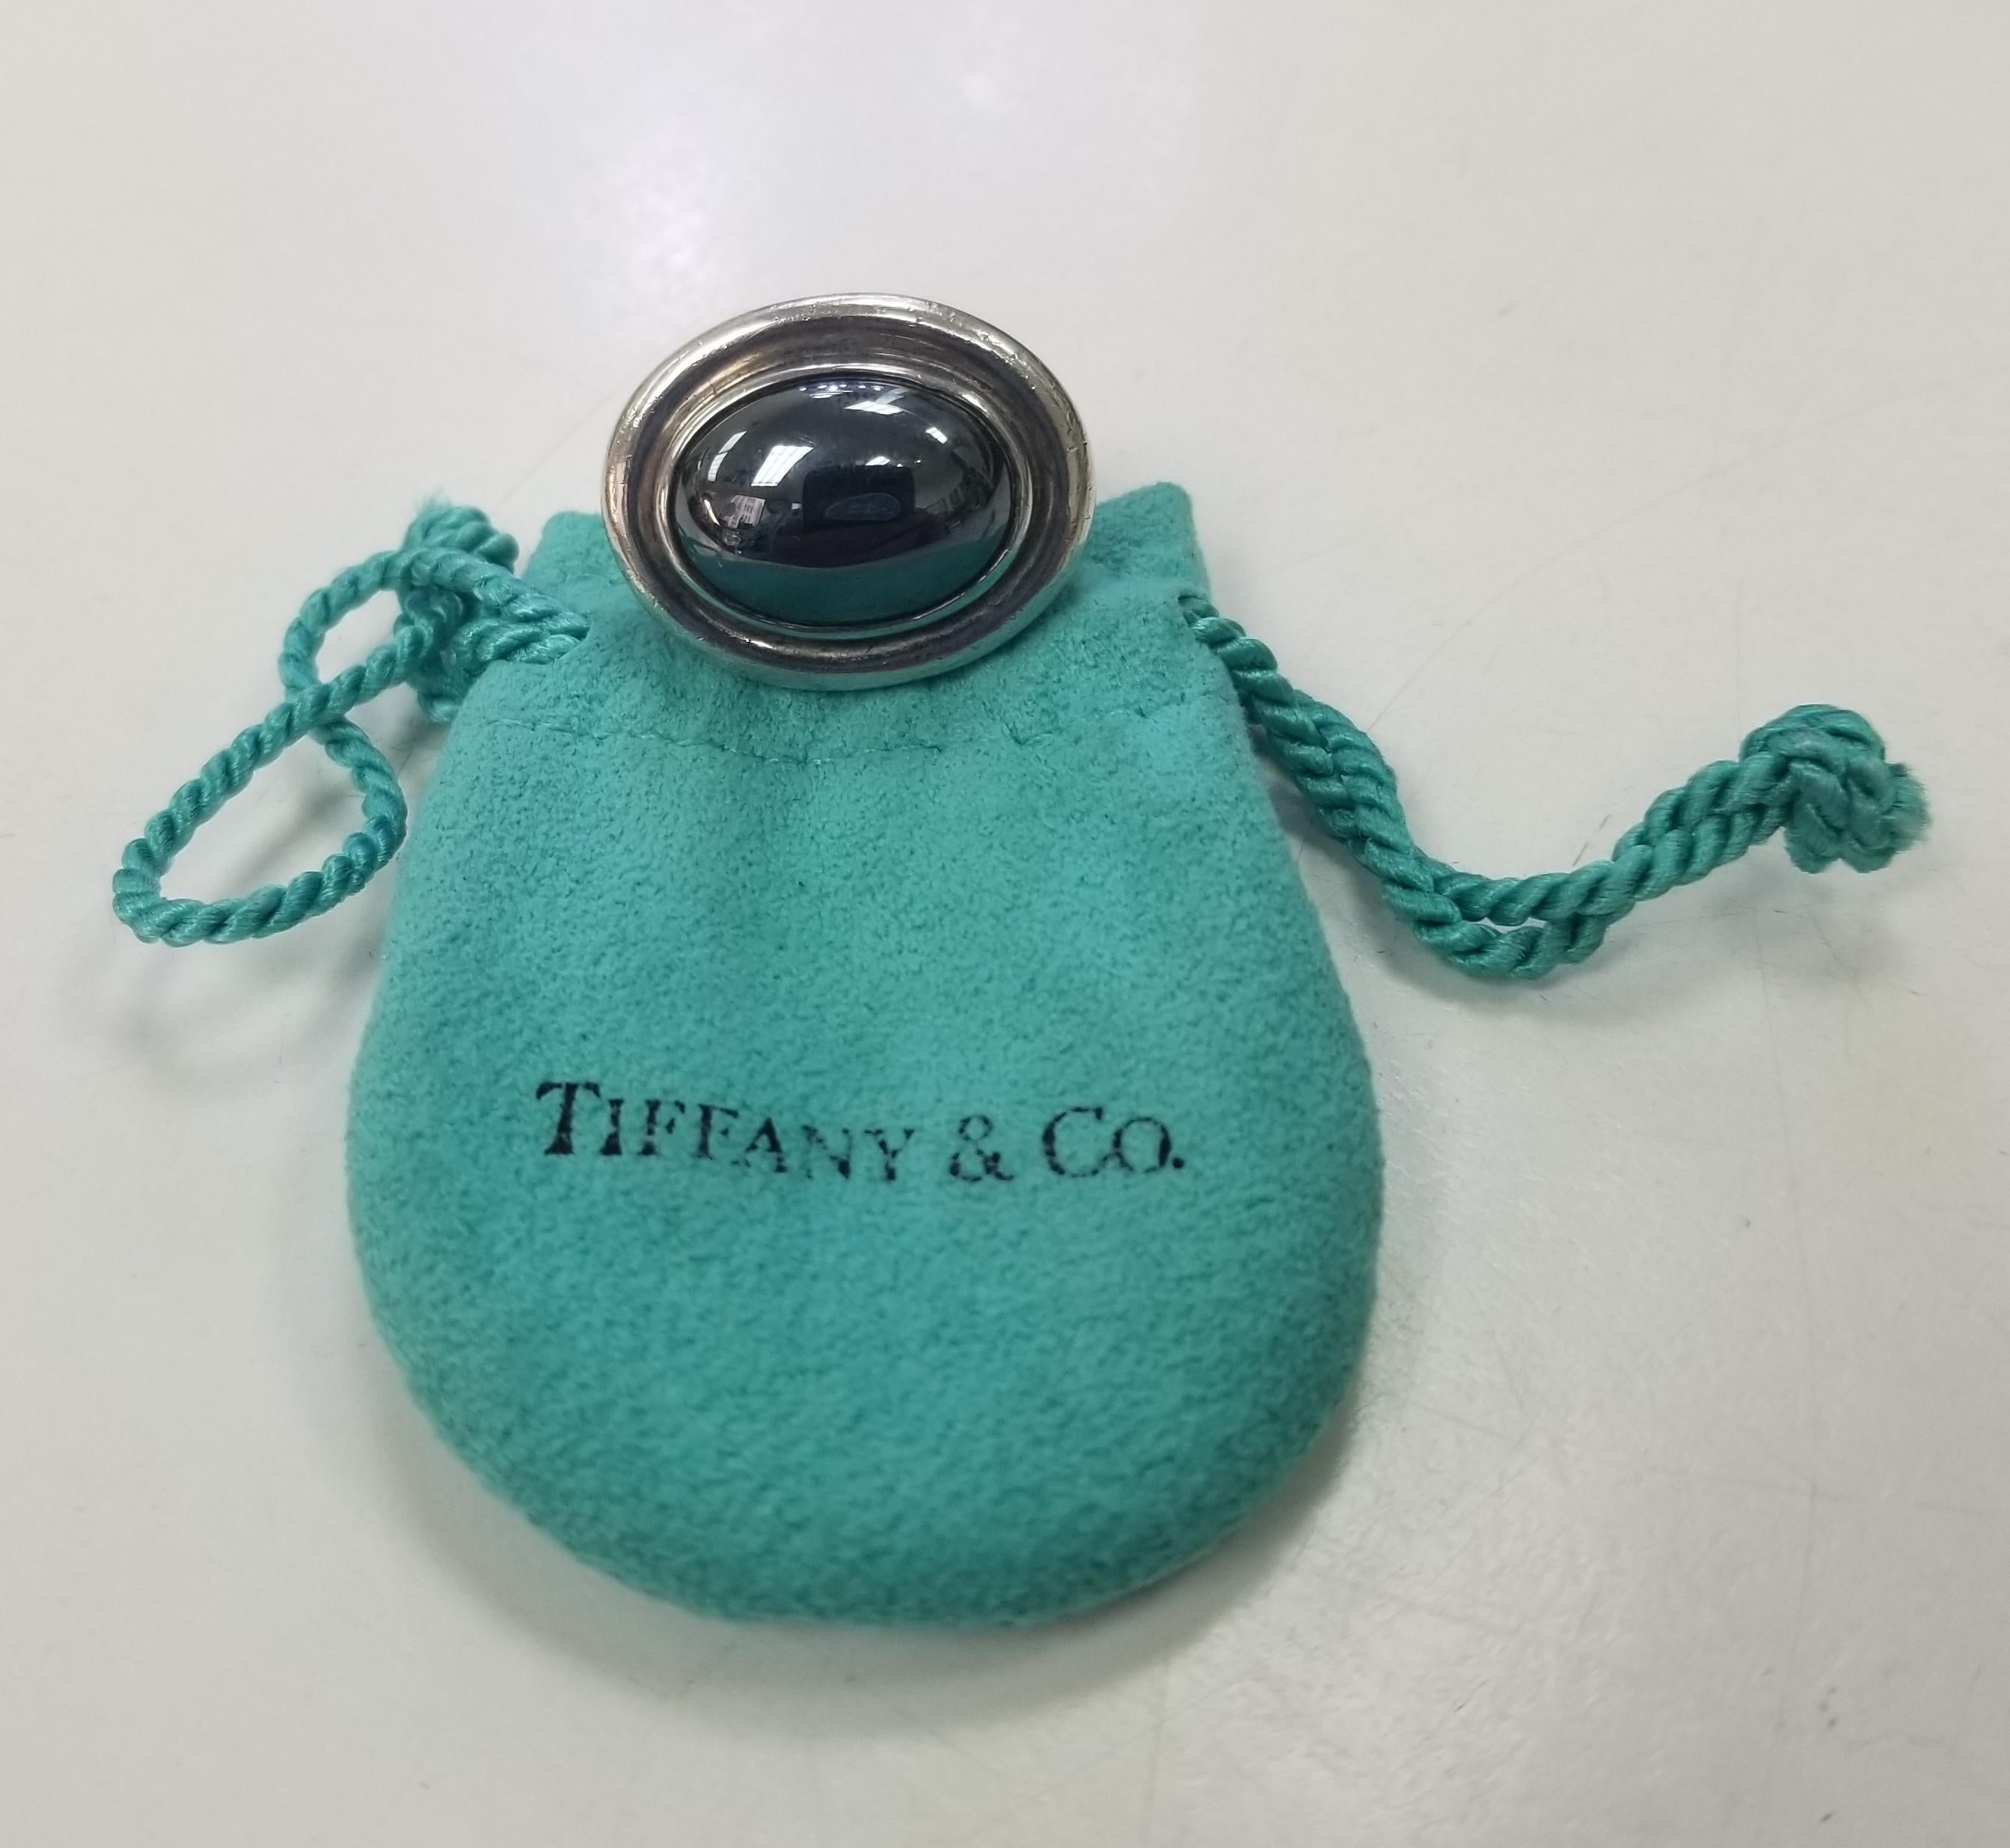 AUTHENTIC TIFFANY & CO SILVER PICASSO ONYX RING! SIZE 6.5 ABSOLUTELY STRIKING!!!! Authentic Tiffany & Co. Ring A very DISTINGUISHED ring - picture doesn't do it justice! Engraving: 